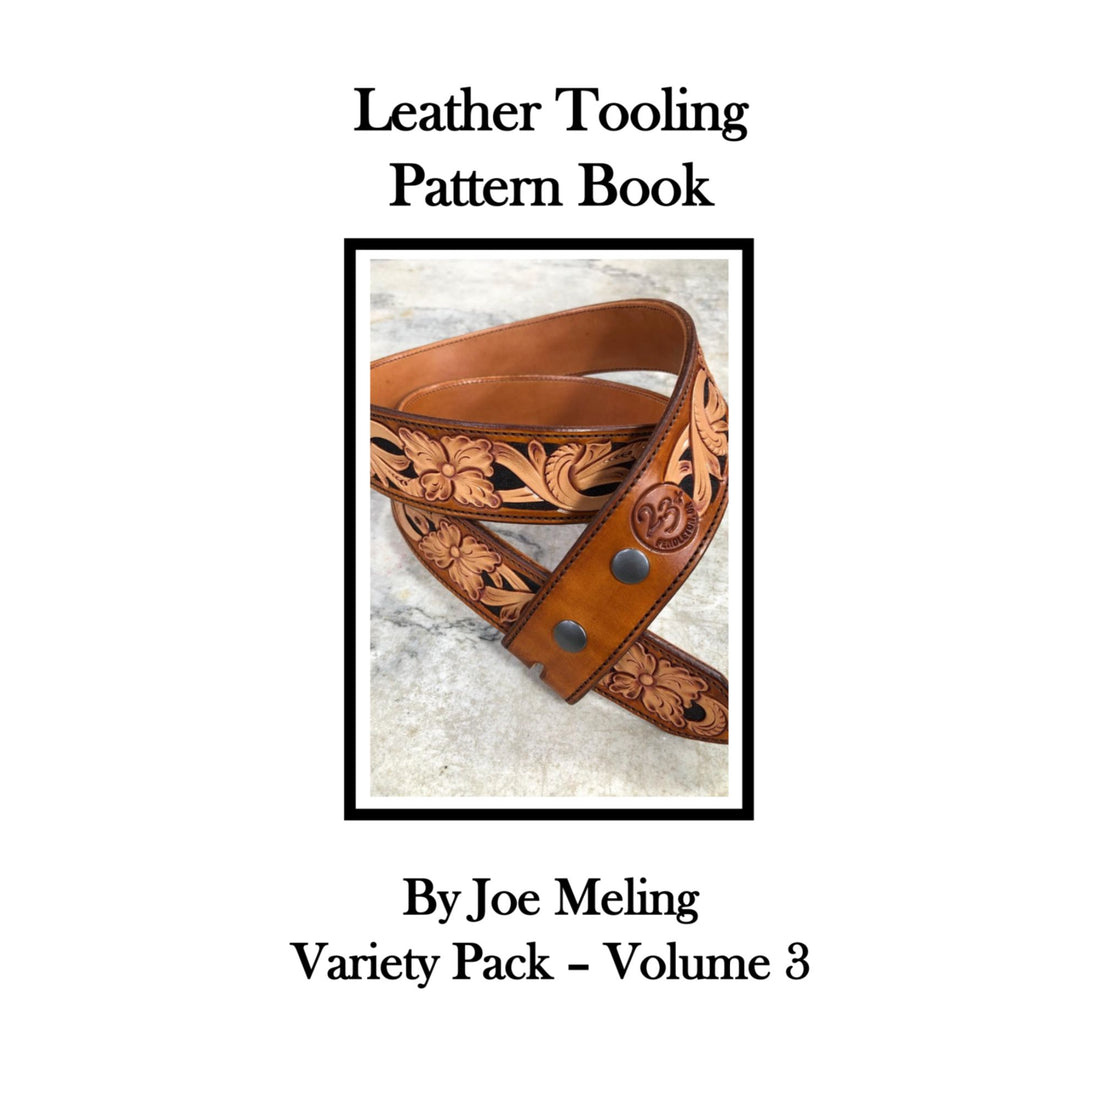 Leather Tooling Pattern Book By Joe Meling - Vol 3